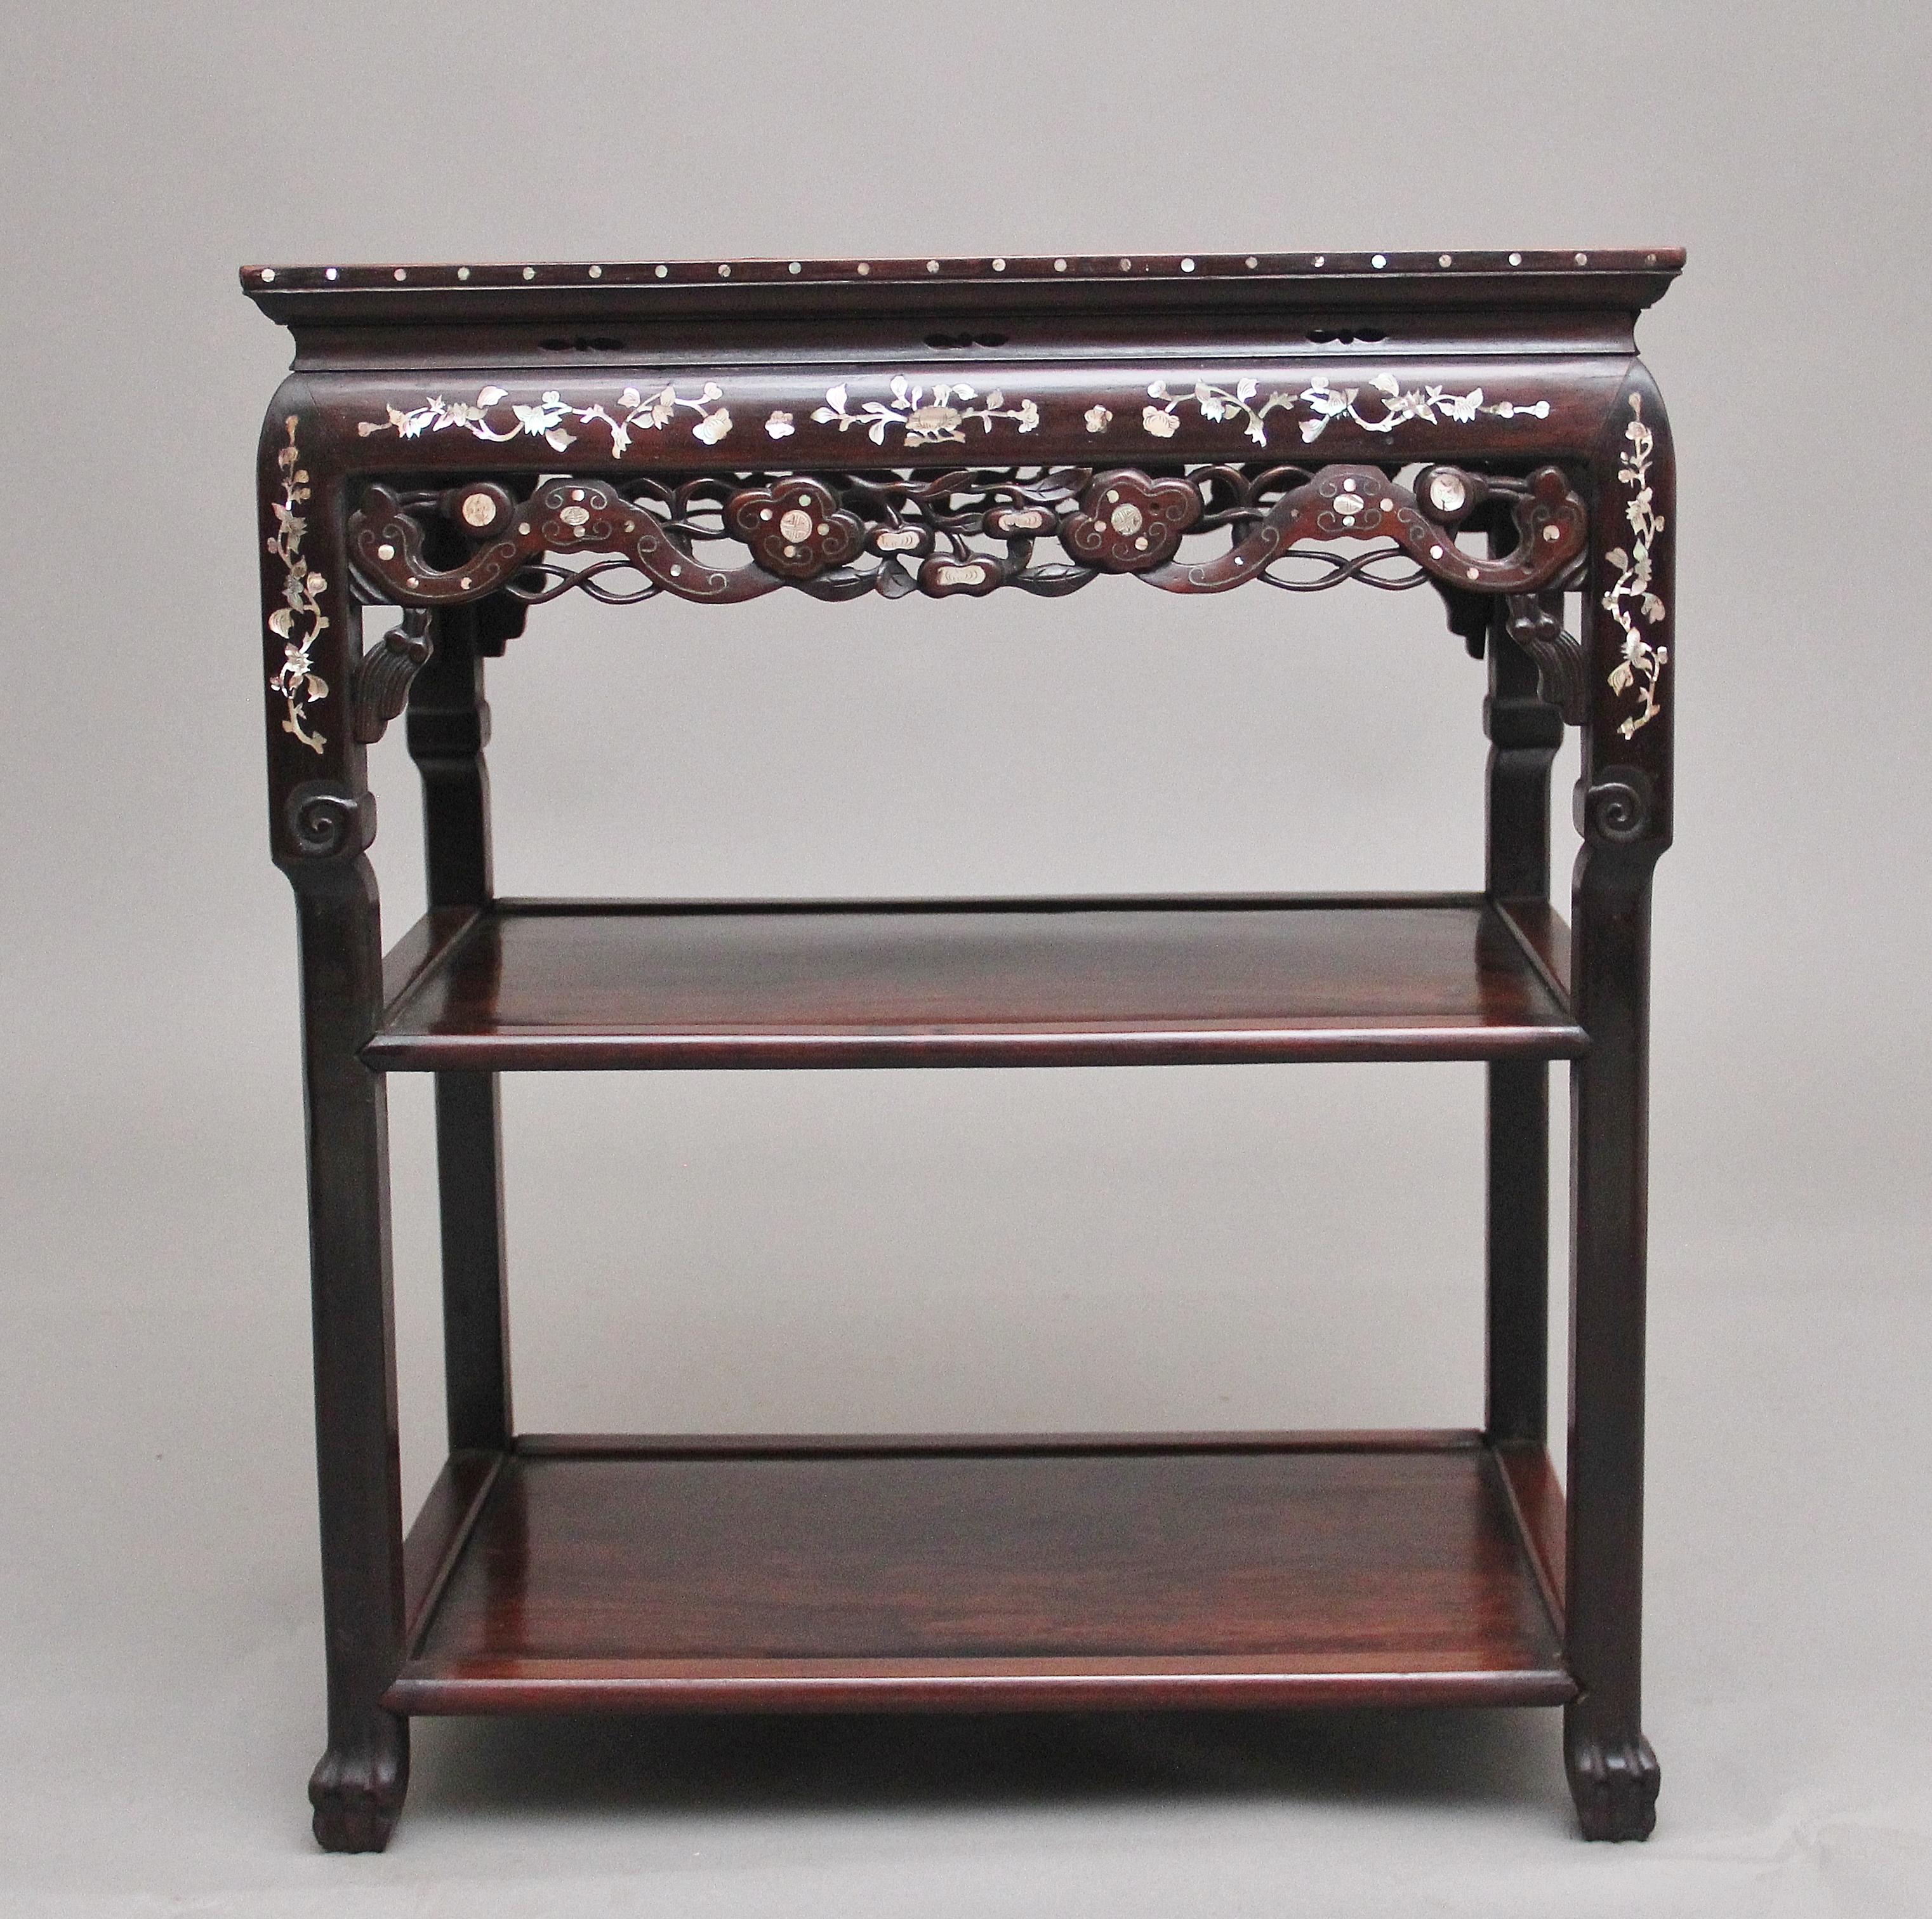 19th Century Chinese Three Tier Occasional Table In Good Condition For Sale In Martlesham, GB